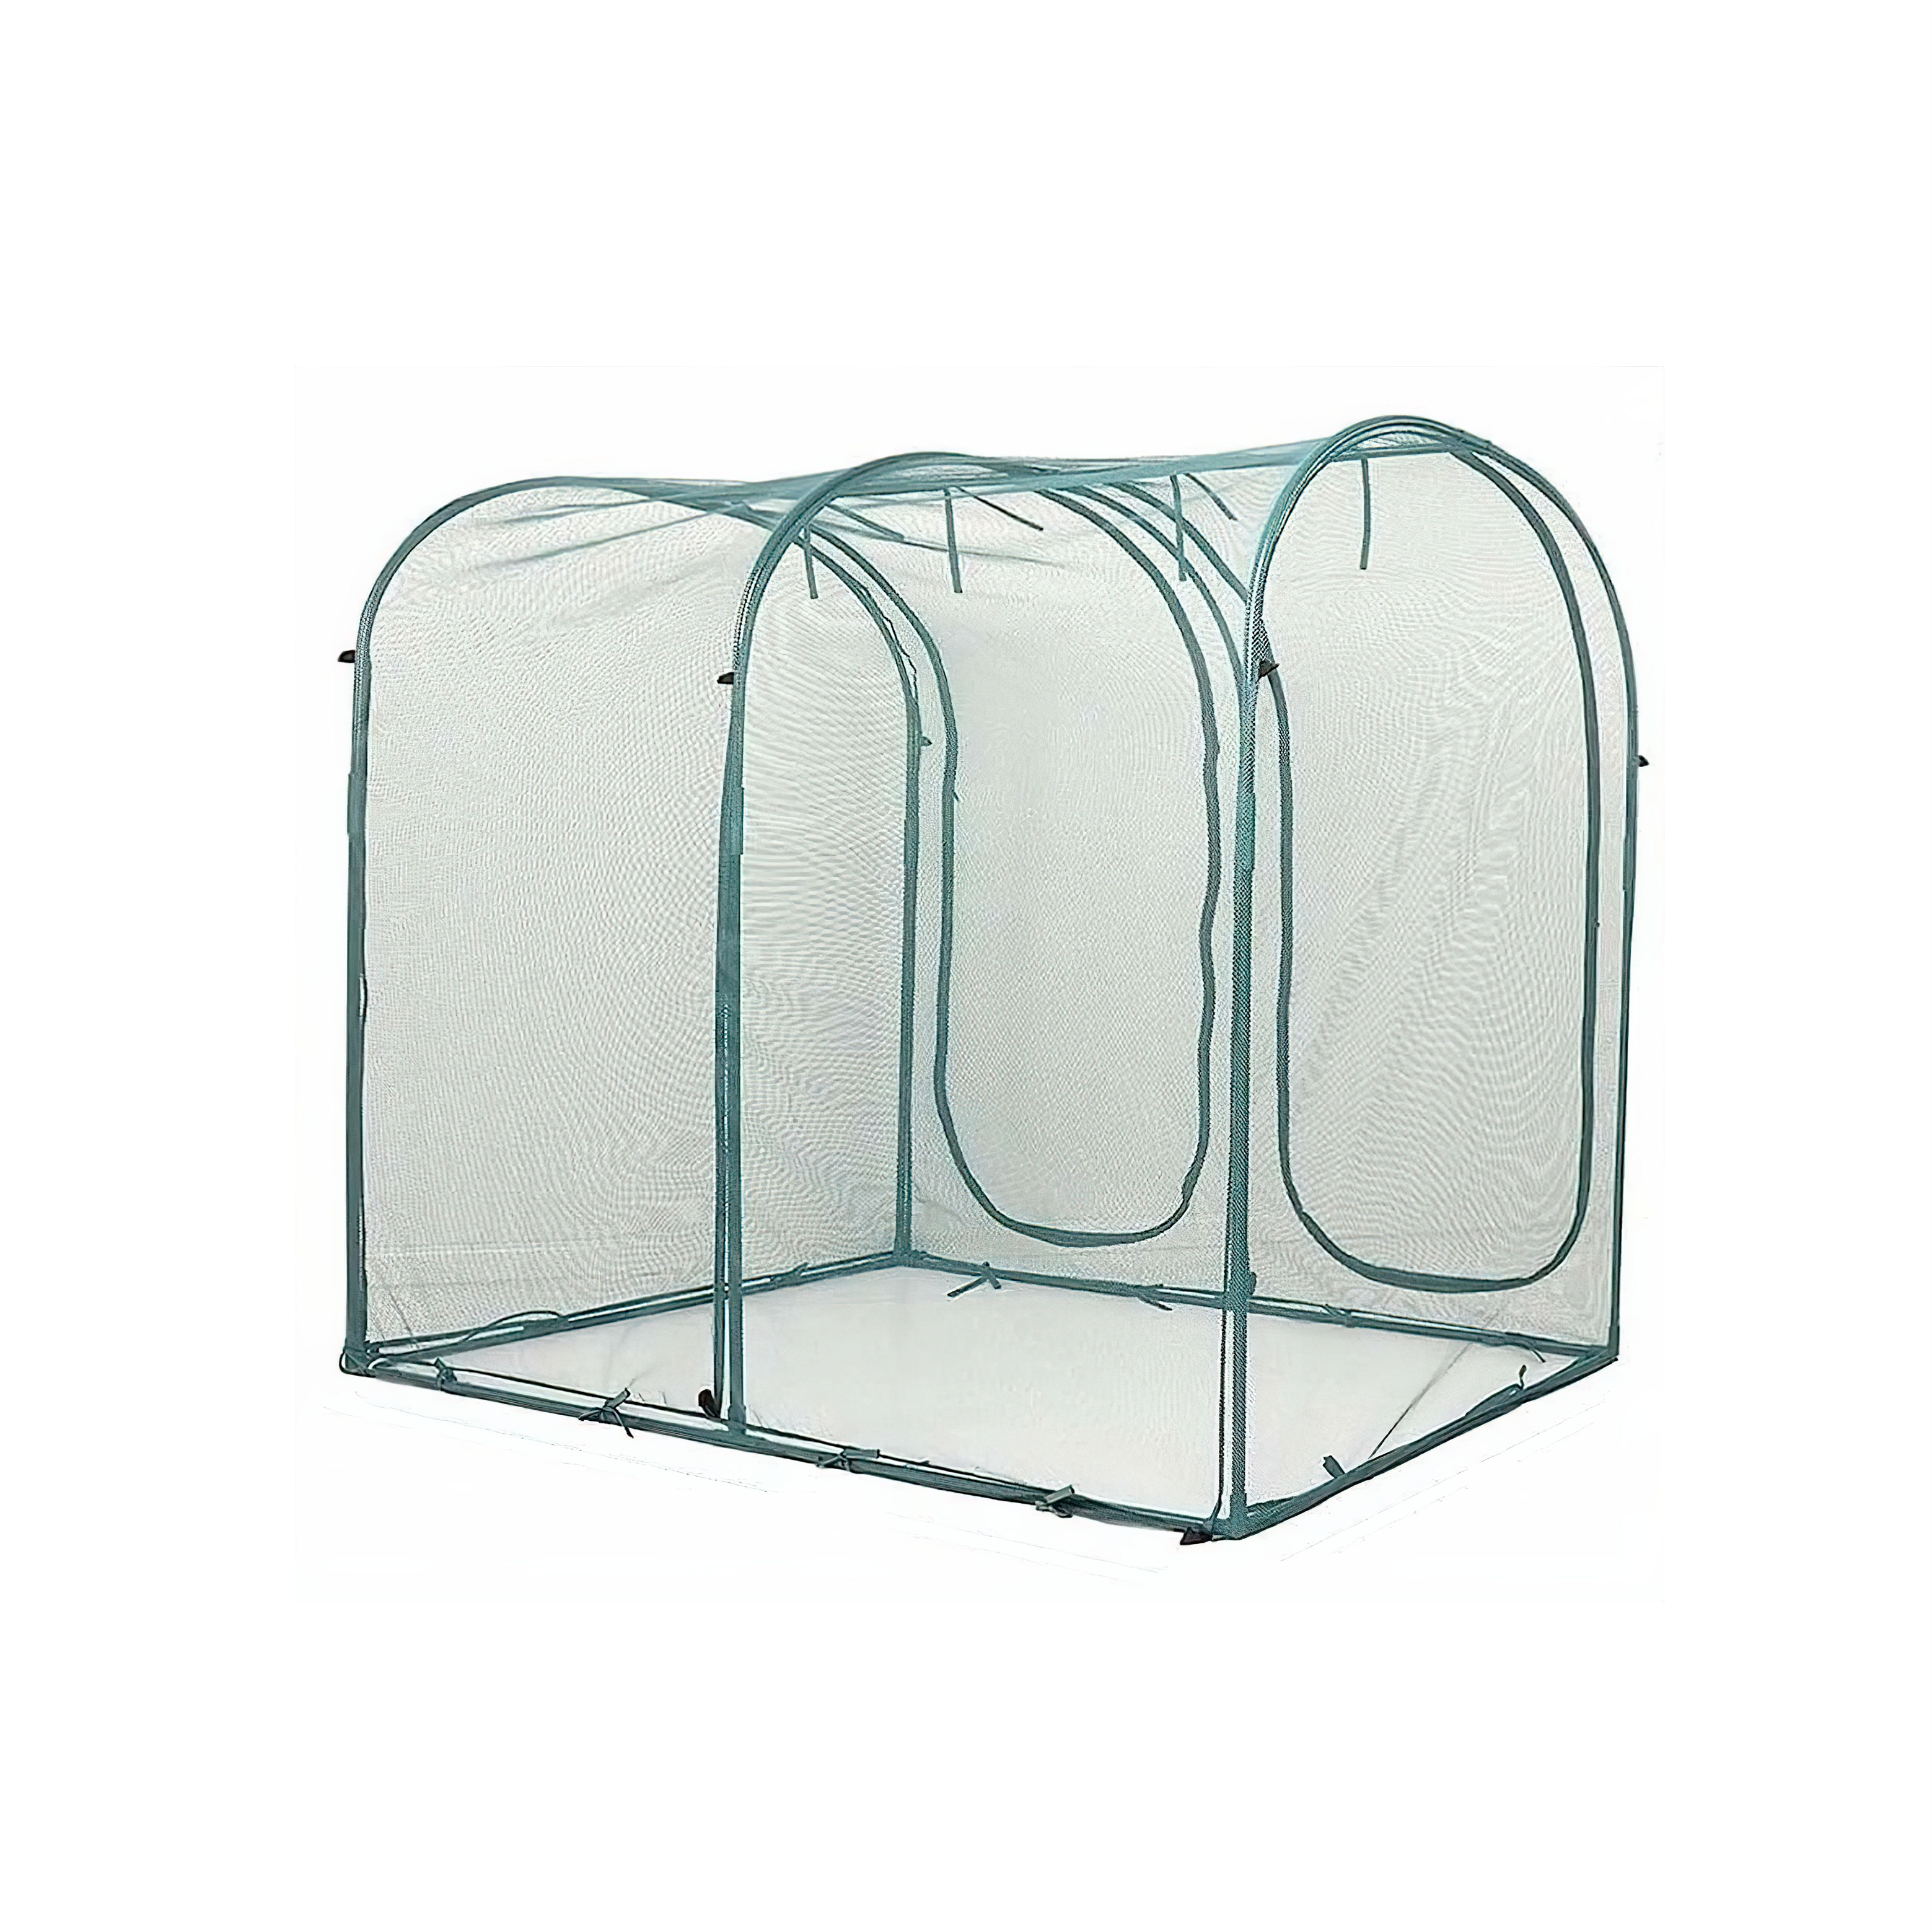 ARCH NET Crop Protection Cage – Compact